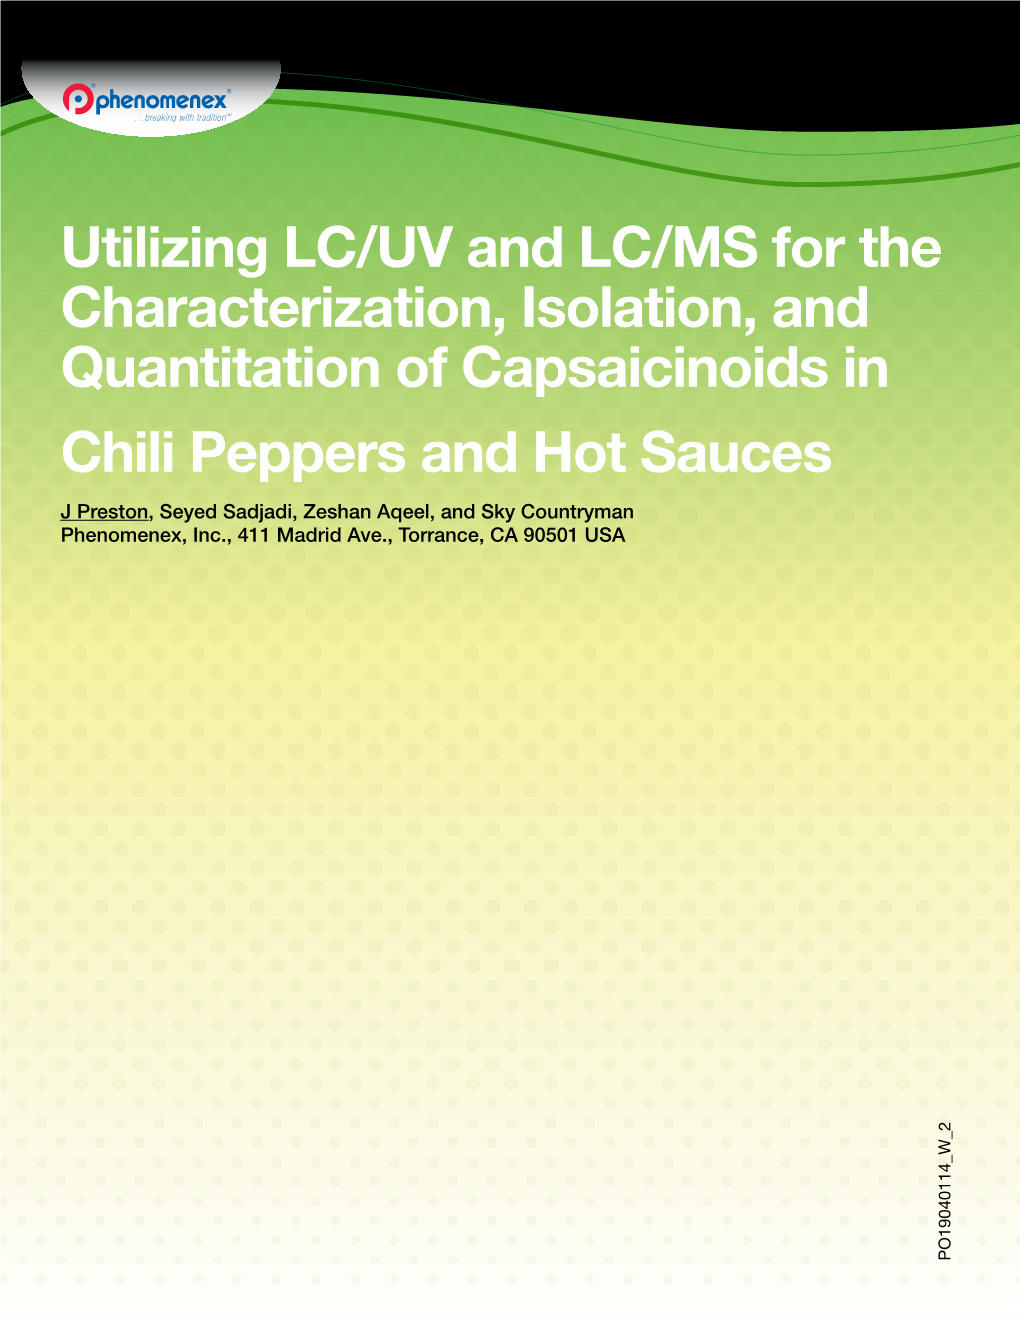 Utilizing LC/UV and LC/MS for the Characterization, Isolation, And